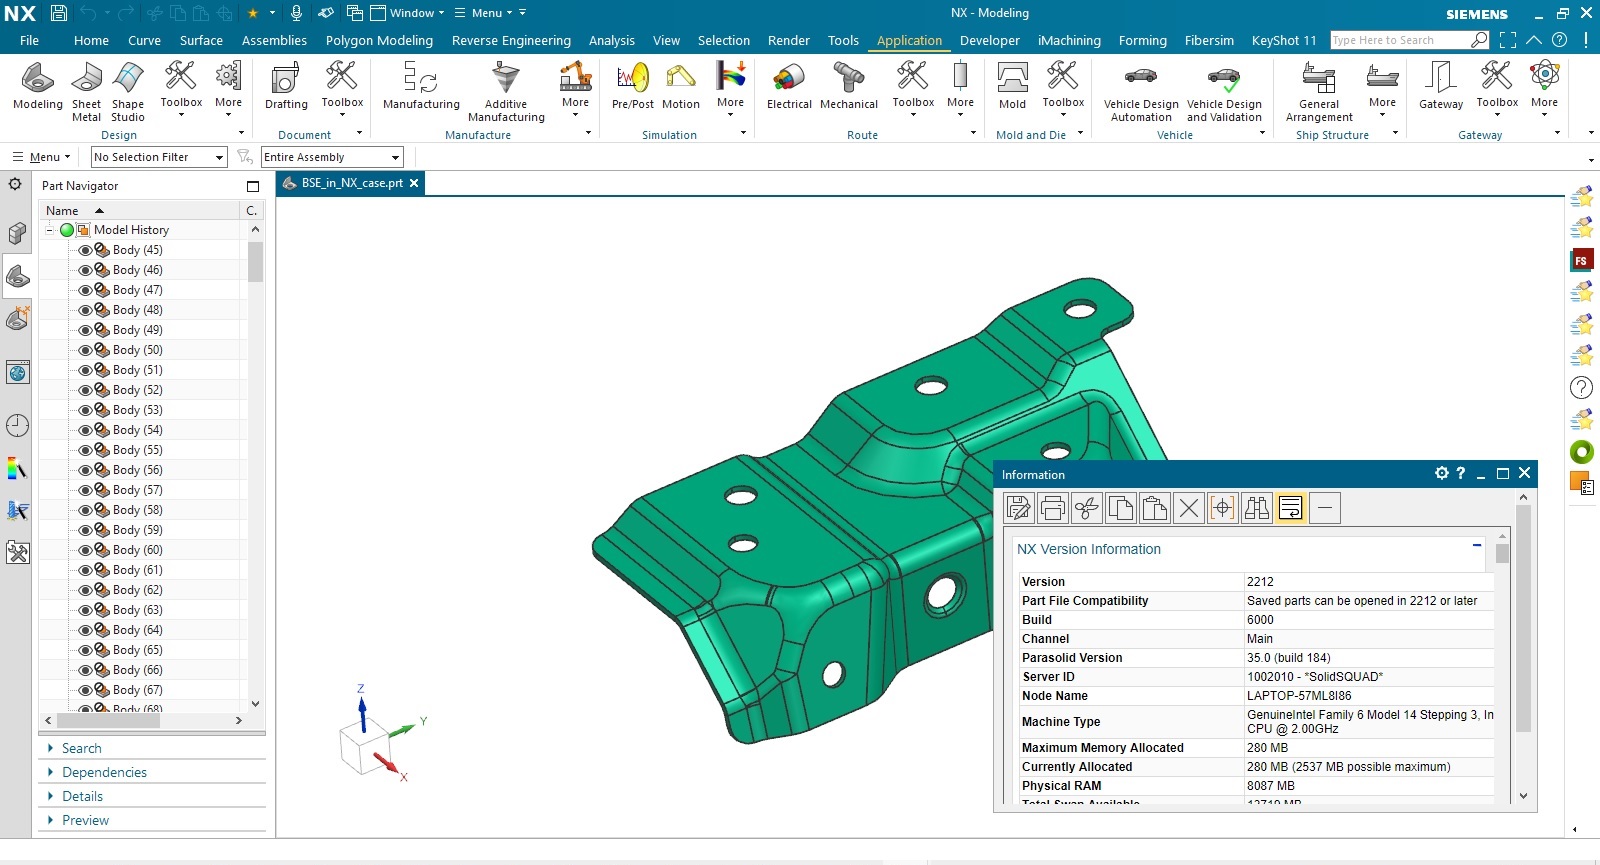 Working with Siemens NX 2212 Build 6000 full license